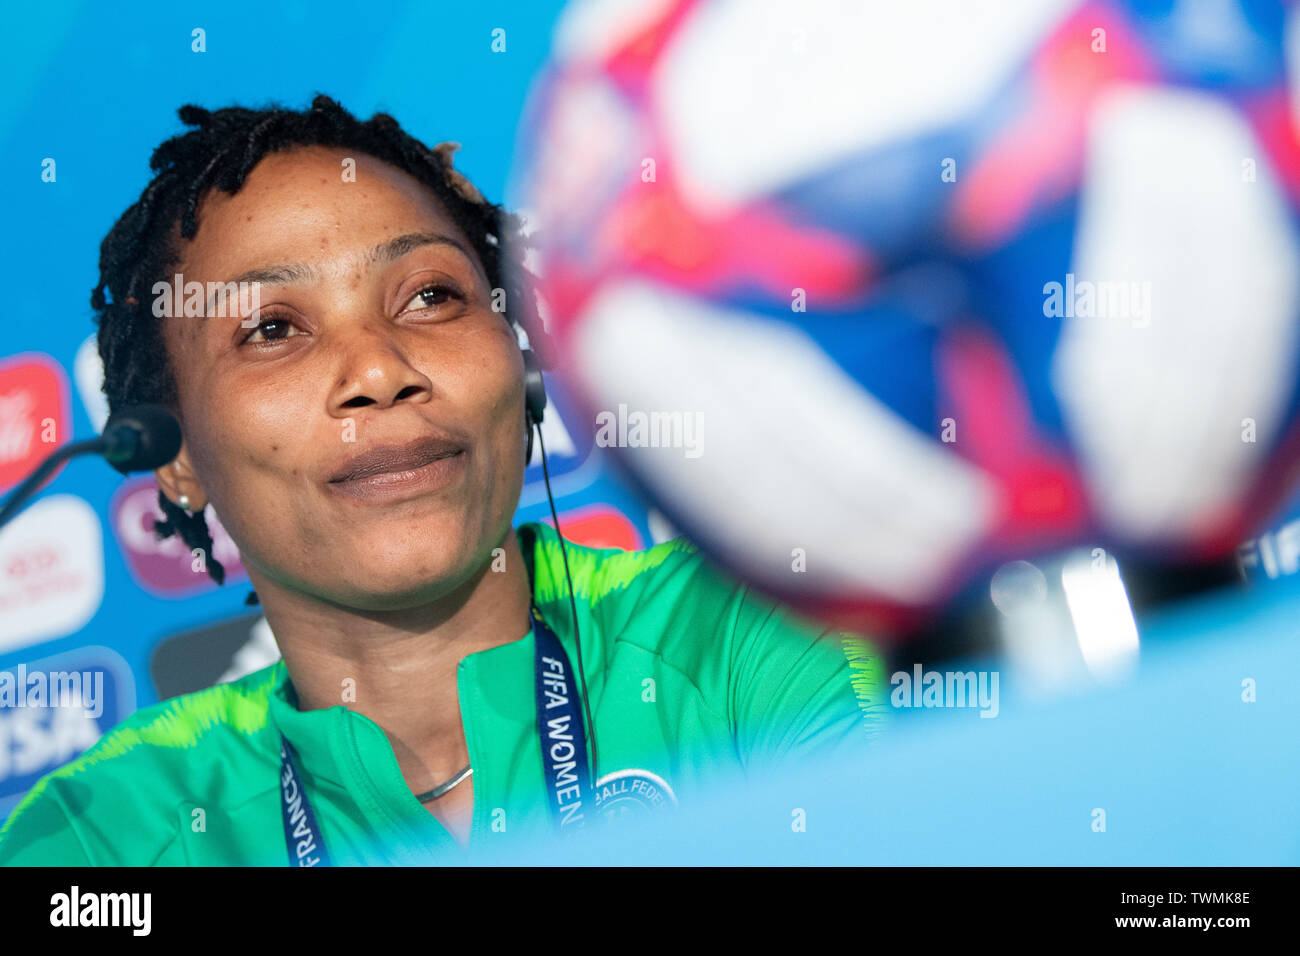 21 June 2019, France (France), Grenoble: Football, women: World Cup, national team, Nigeria, final press conference: player Onome Ebi sits on the podium at the press conference. Photo: Sebastian Gollnow/dpa Stock Photo